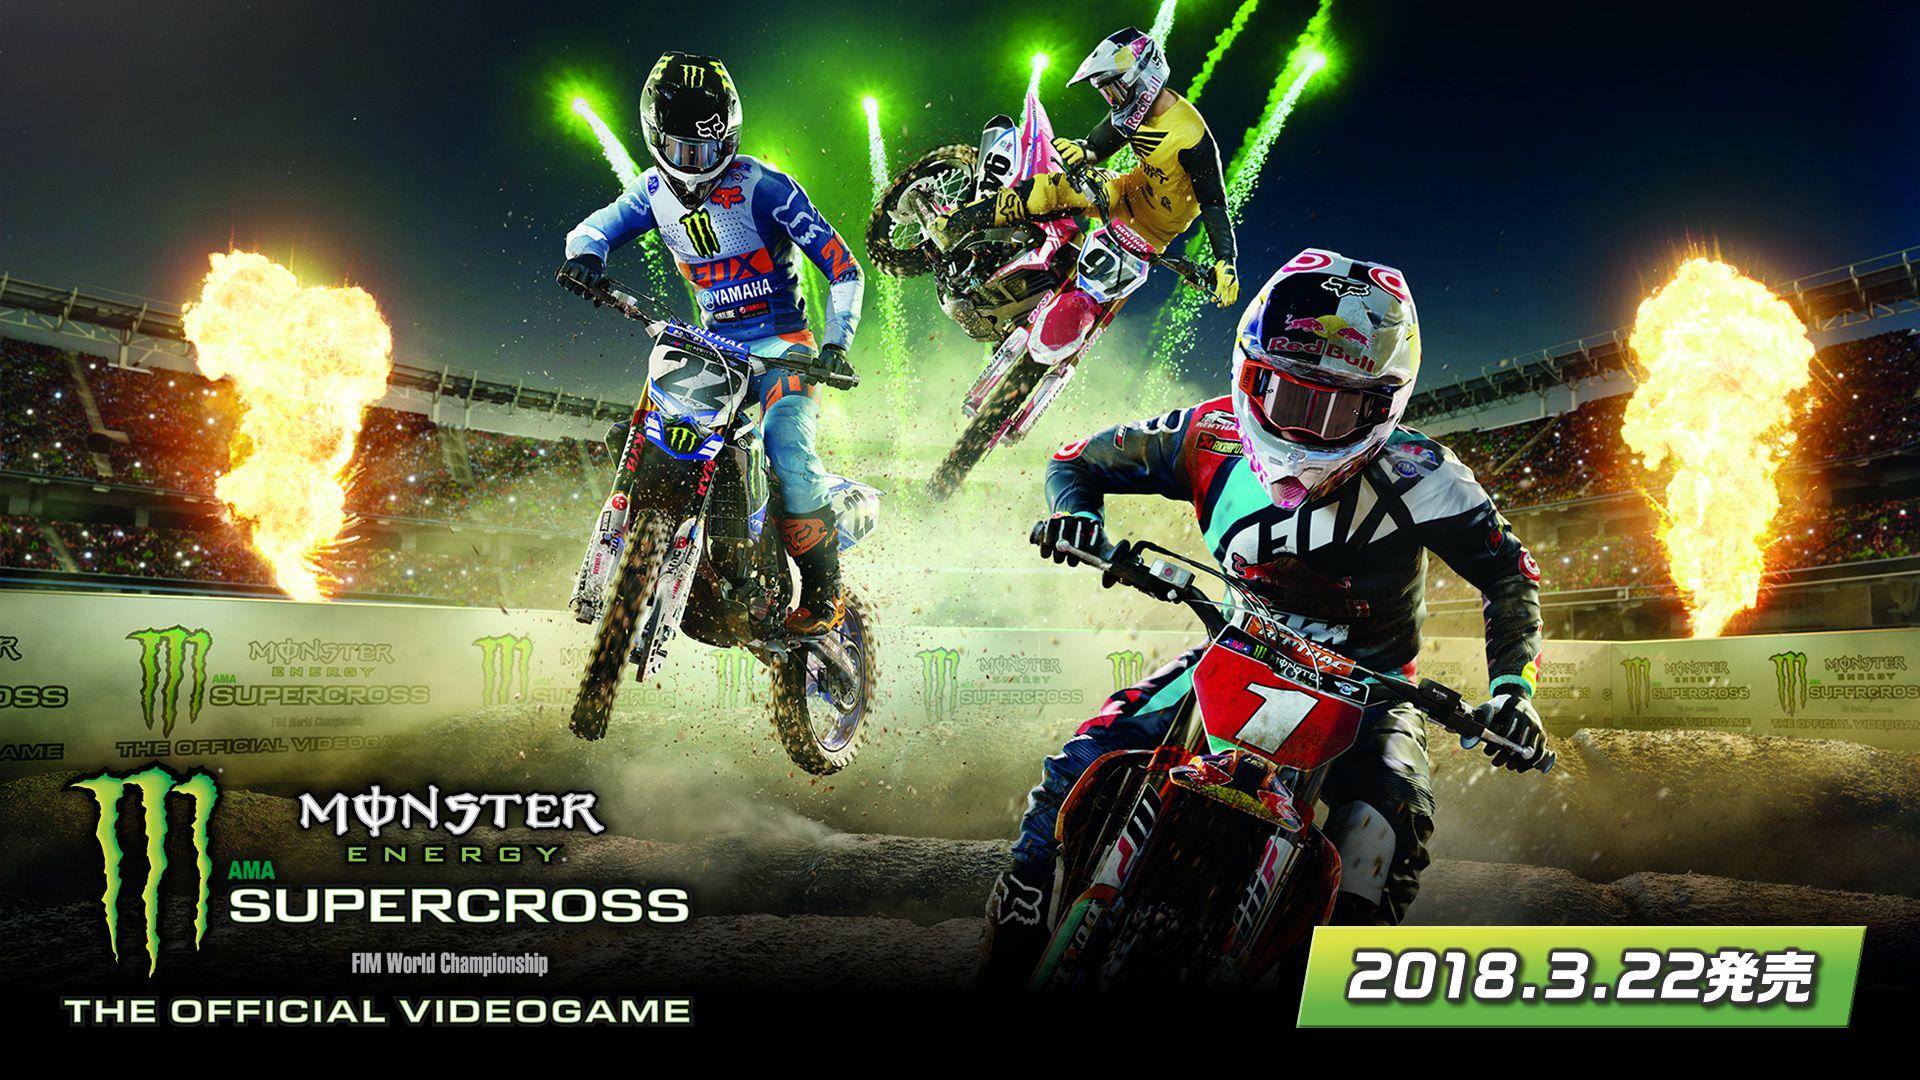 Monster Energy Supercross: The Official Videogame heading to Japan